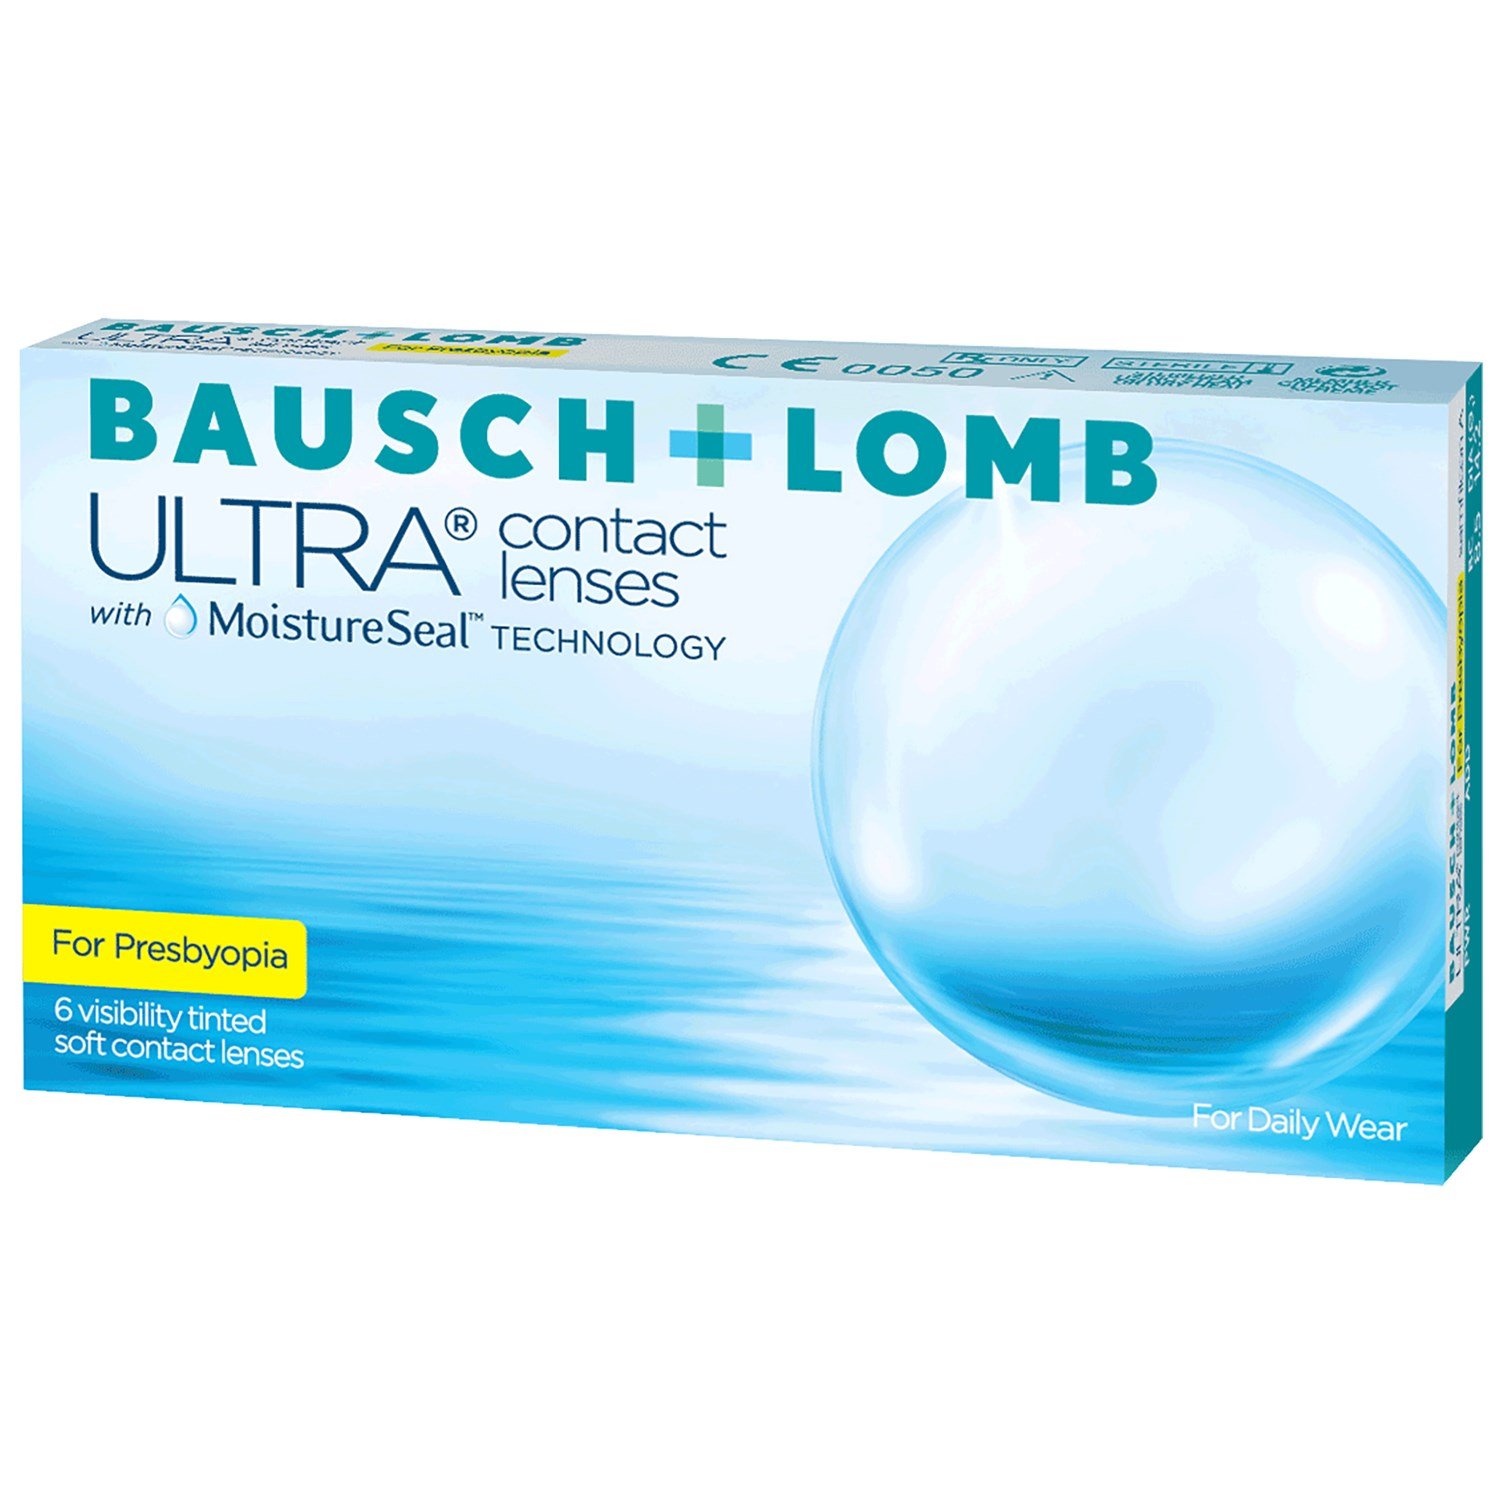 Bausch + Lomb ULTRA for Presbyopia contact lenses